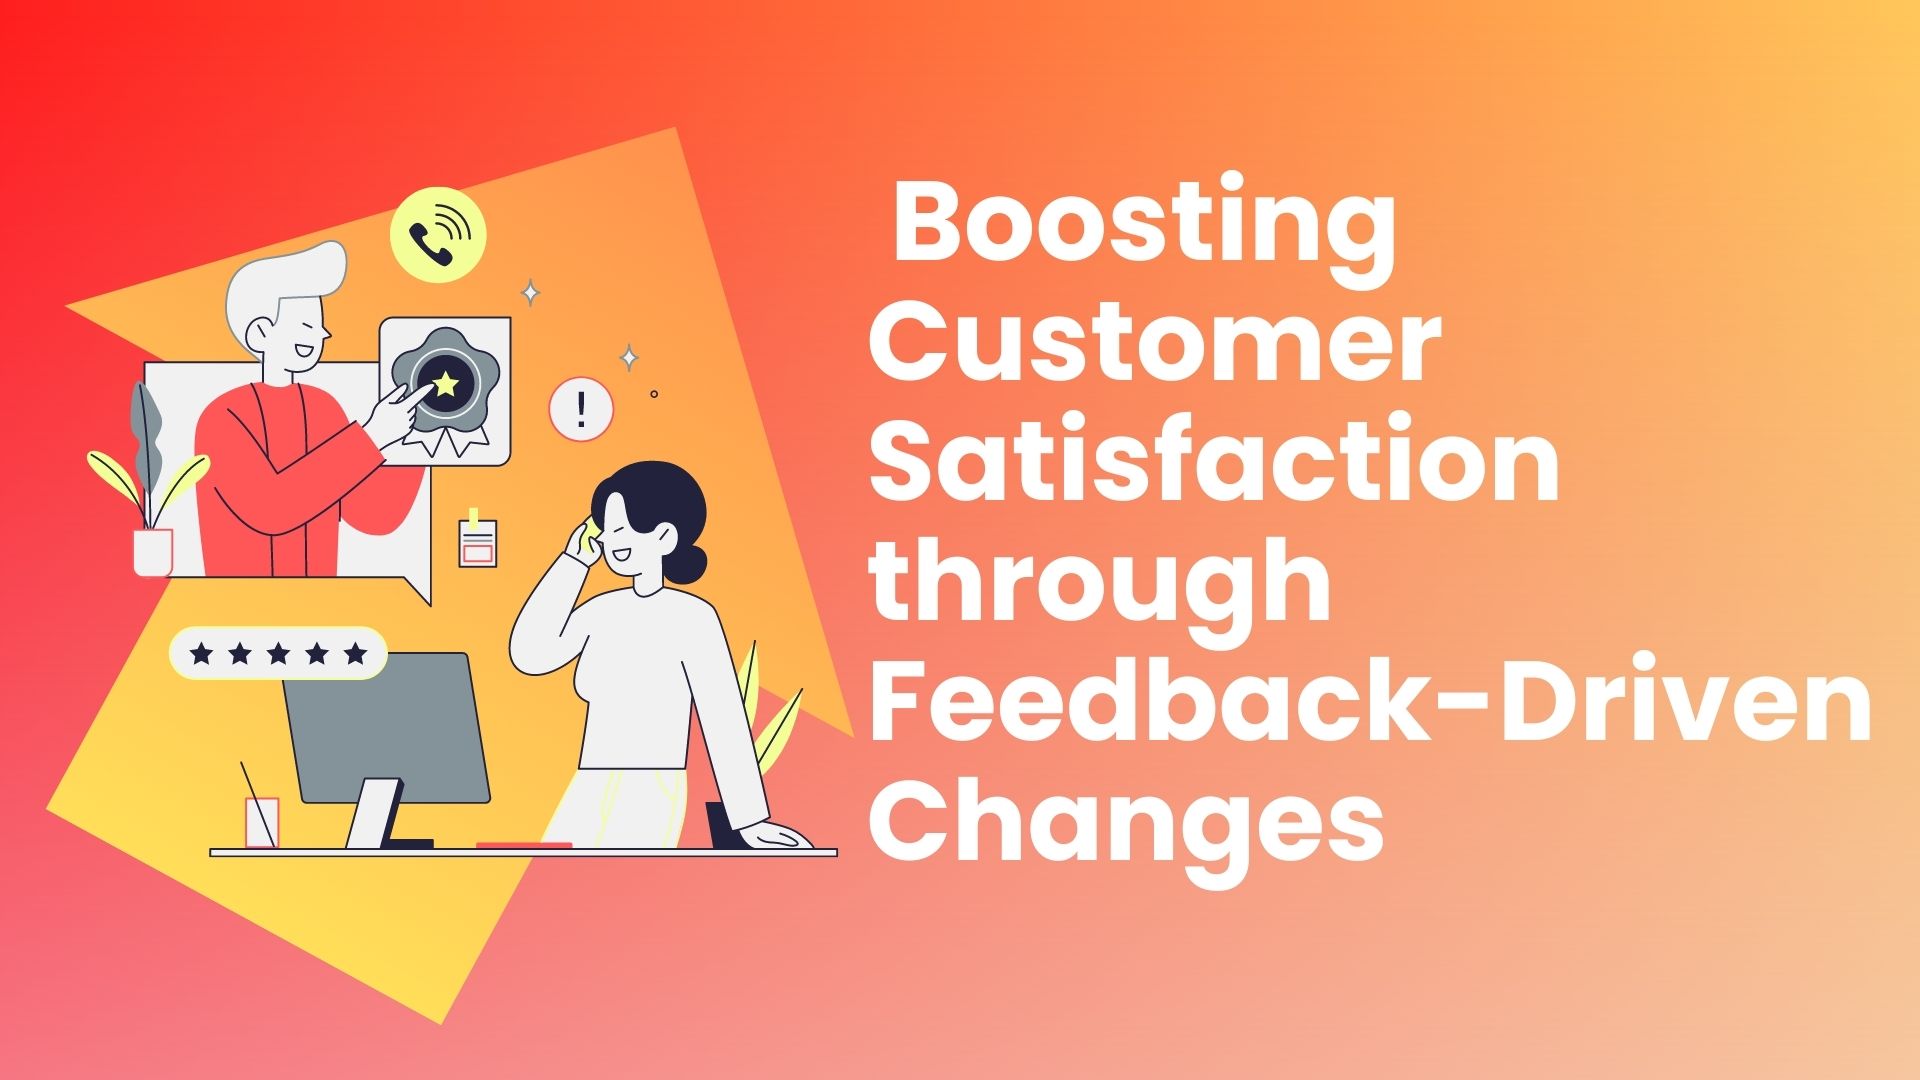 Boosting Customer Satisfaction through Feedback-Driven Changes